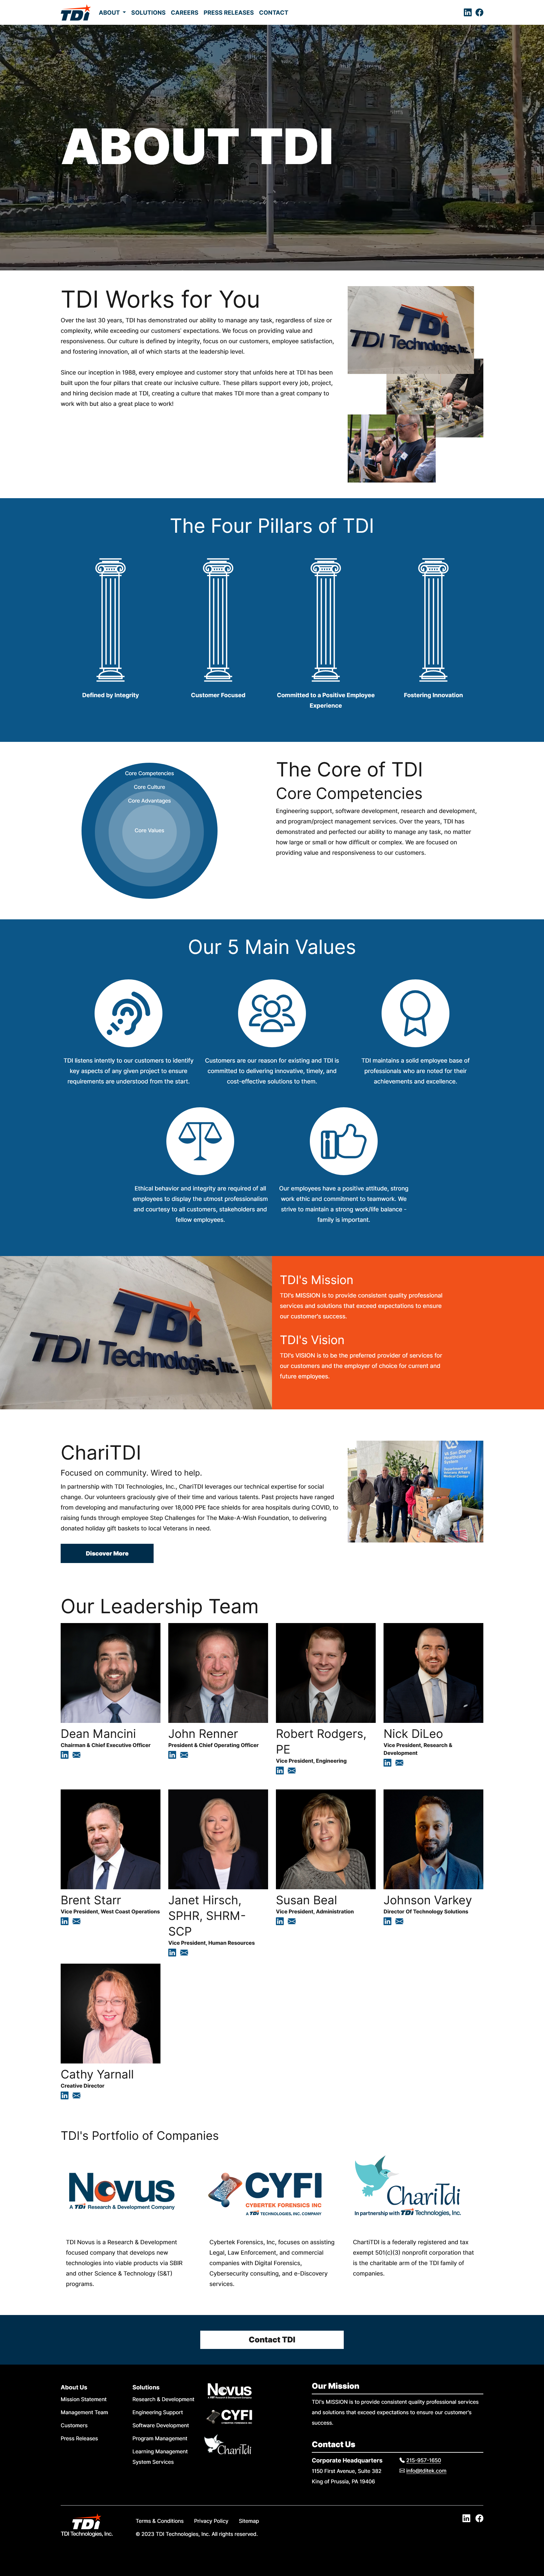 TDI Technologies Website About Us Page